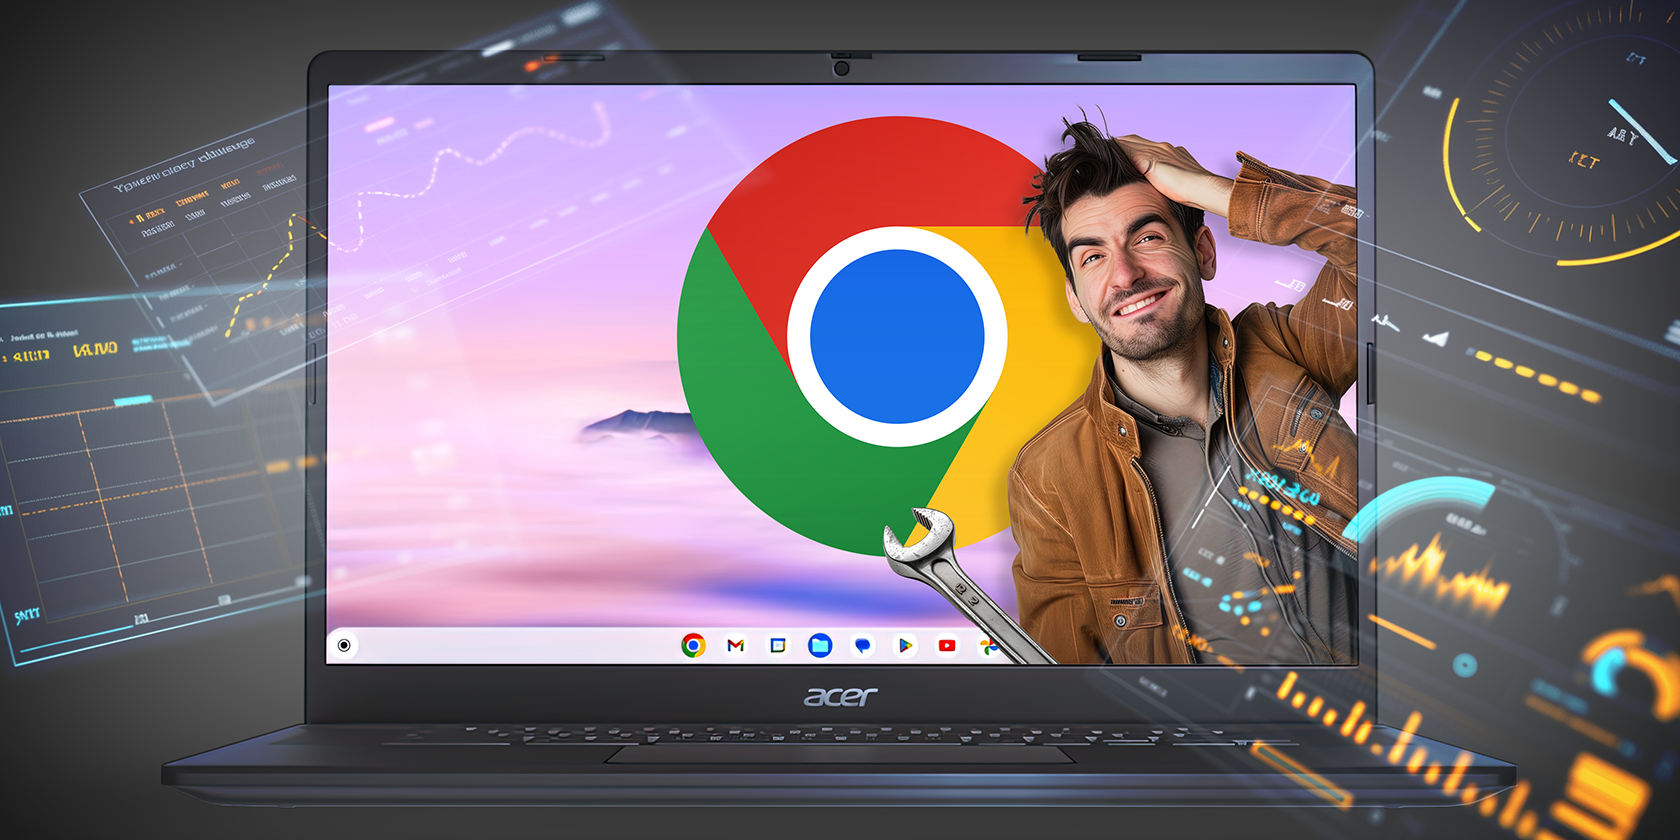 A man emerging from a Chrome browser on a laptop, holding a wrench, surrounded by digital graphics.